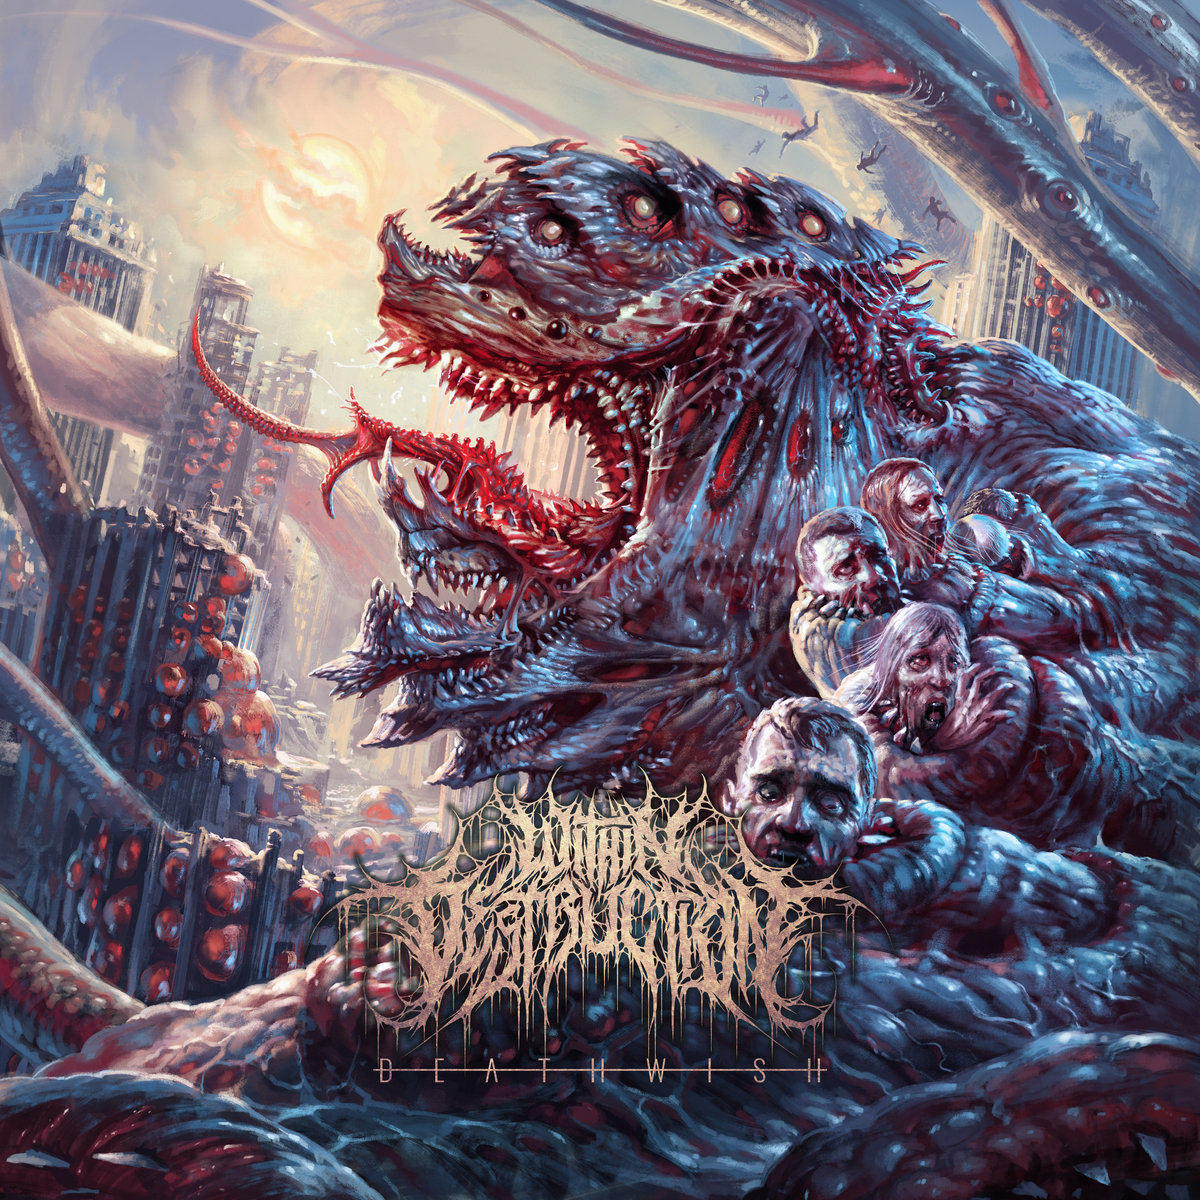 http://www.metalmusicarchives.com/images/covers/within-destruction-deathwish-20180412084647.jpg